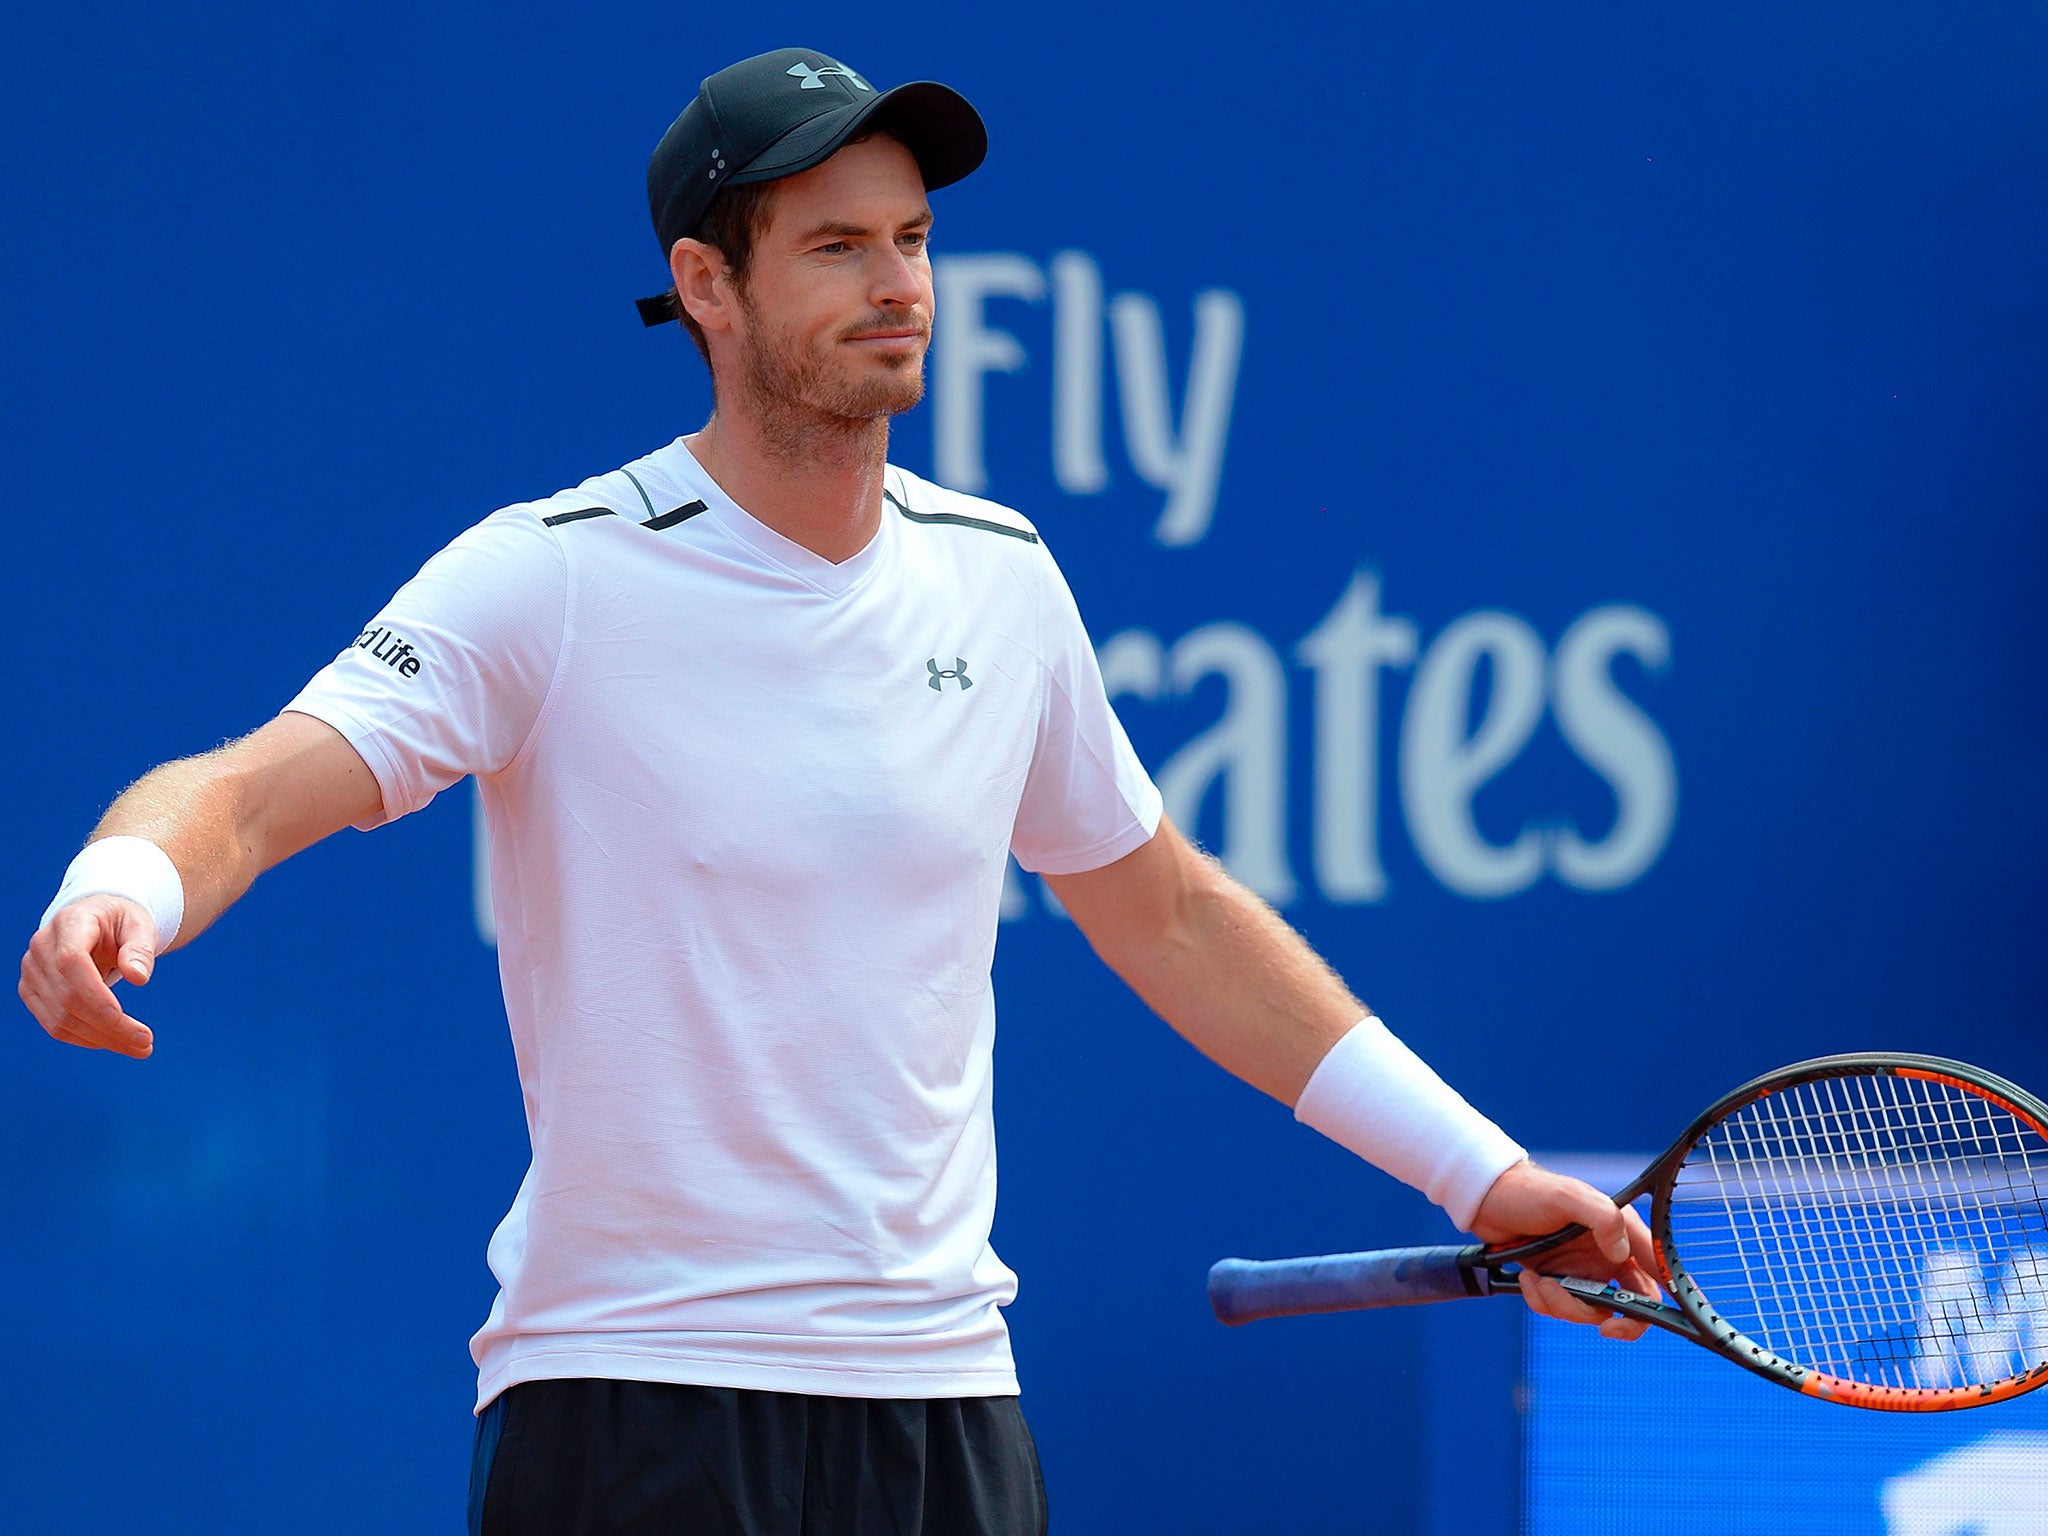 Andy Murray has been eliminated from the Barcelona Open after defeat by Dominic Thiem